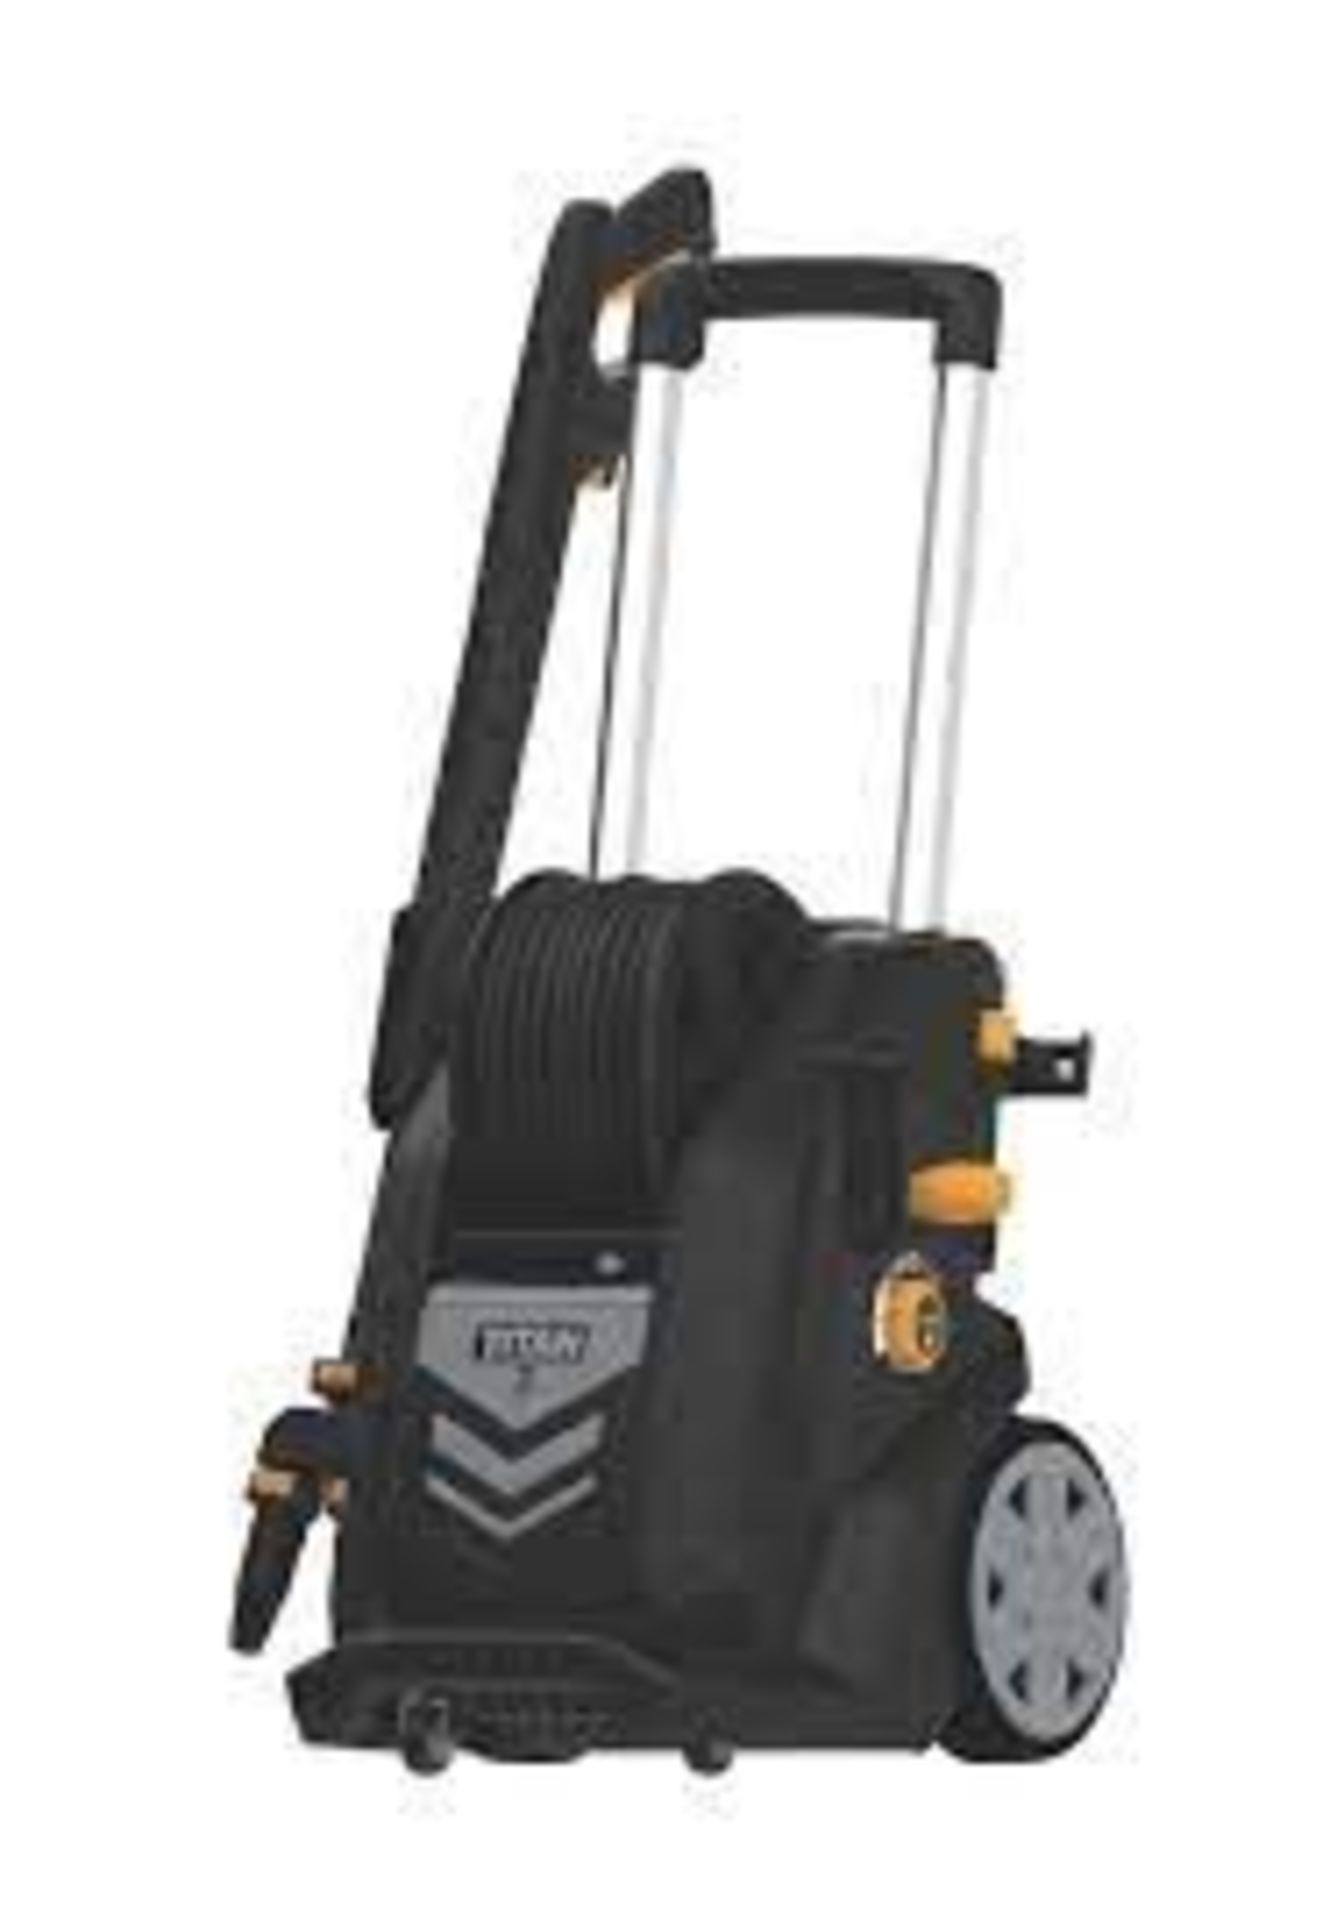 TITAN 155BAR ELECTRIC HIGH PRESSURE WASHER 2.7KW 230V. - R14.13. Easy to manoeuvre pressure washer